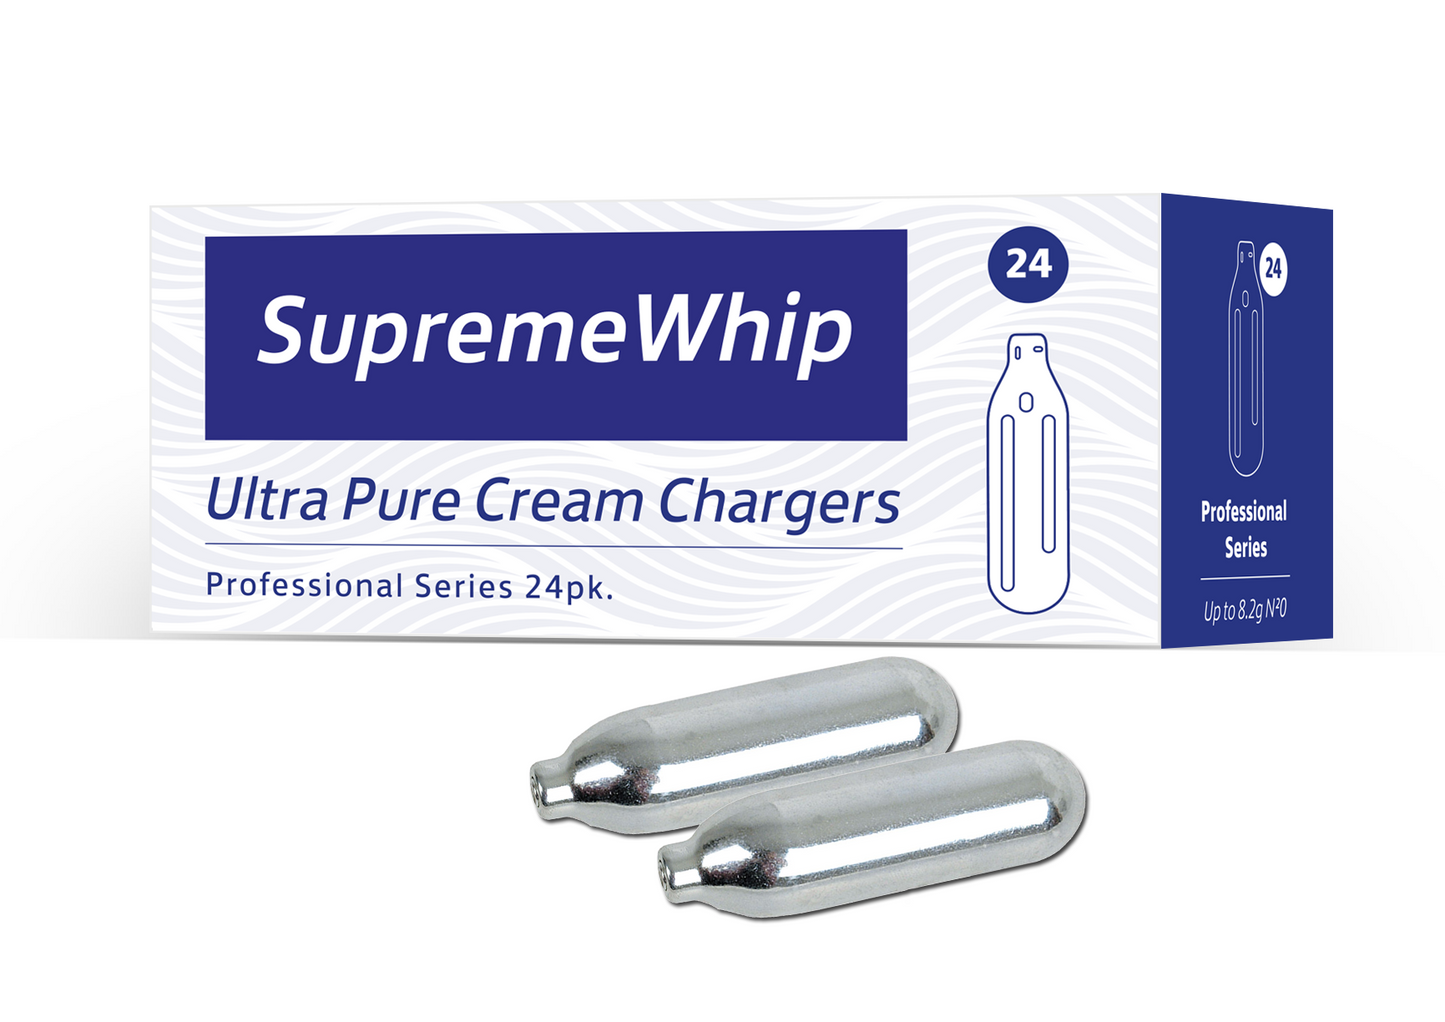 Supremewhip cream chargers with skull print